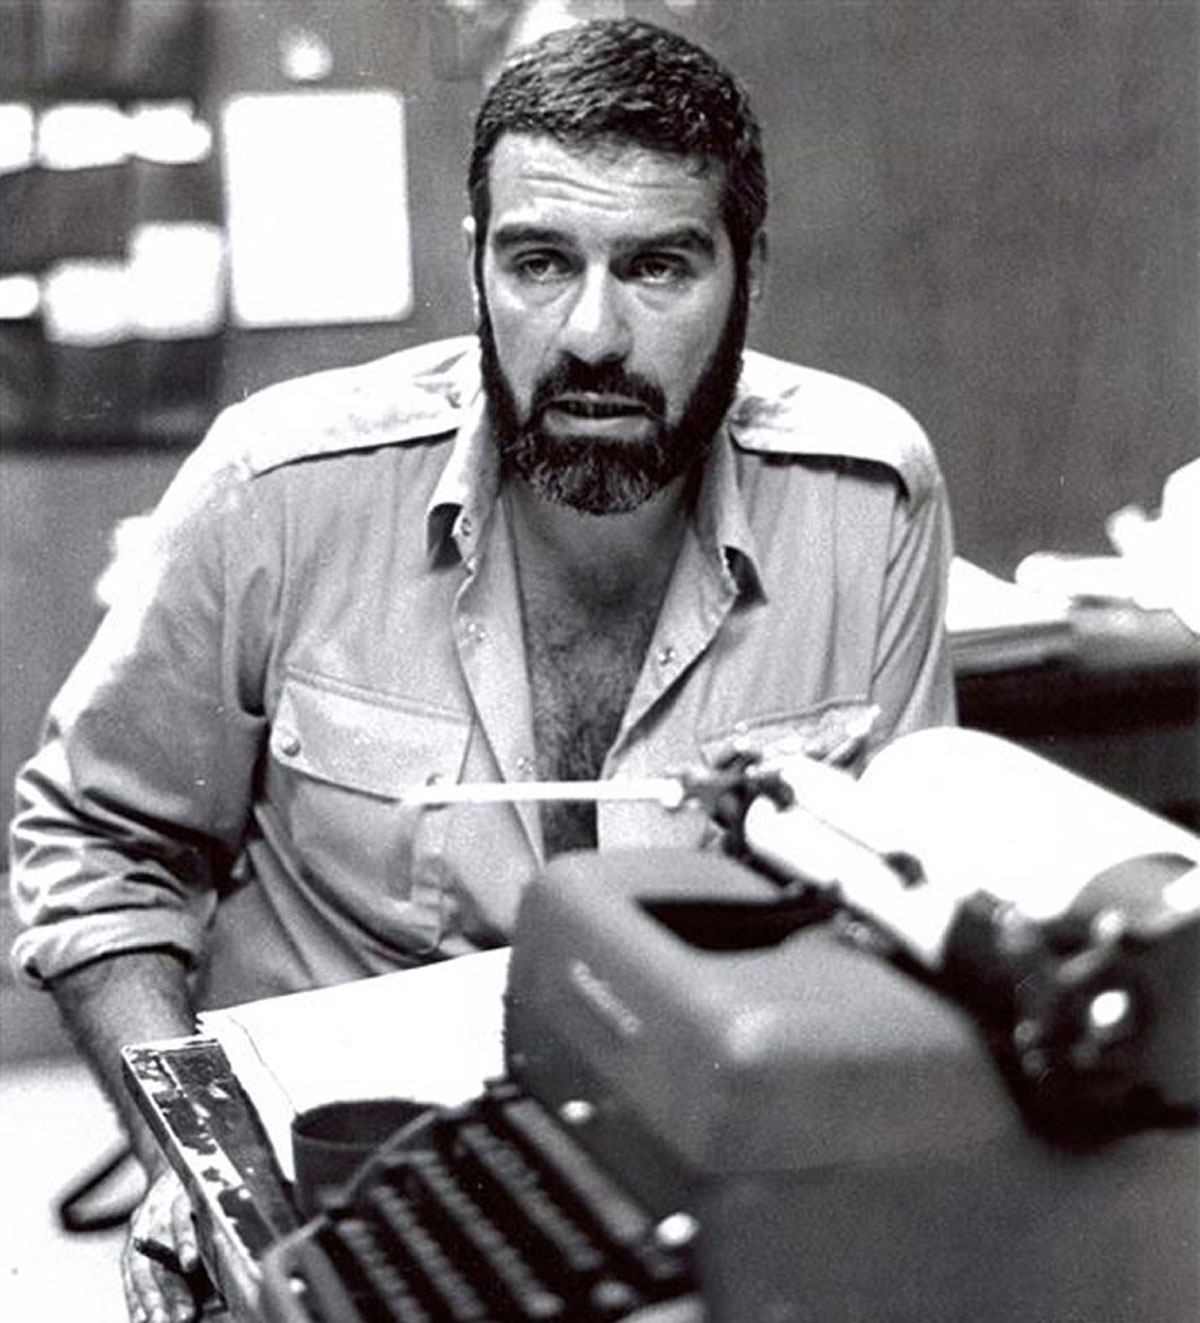 Sergei Dovlatov in the office of 'The New American' newspaper, 1980. Source: Archive photo